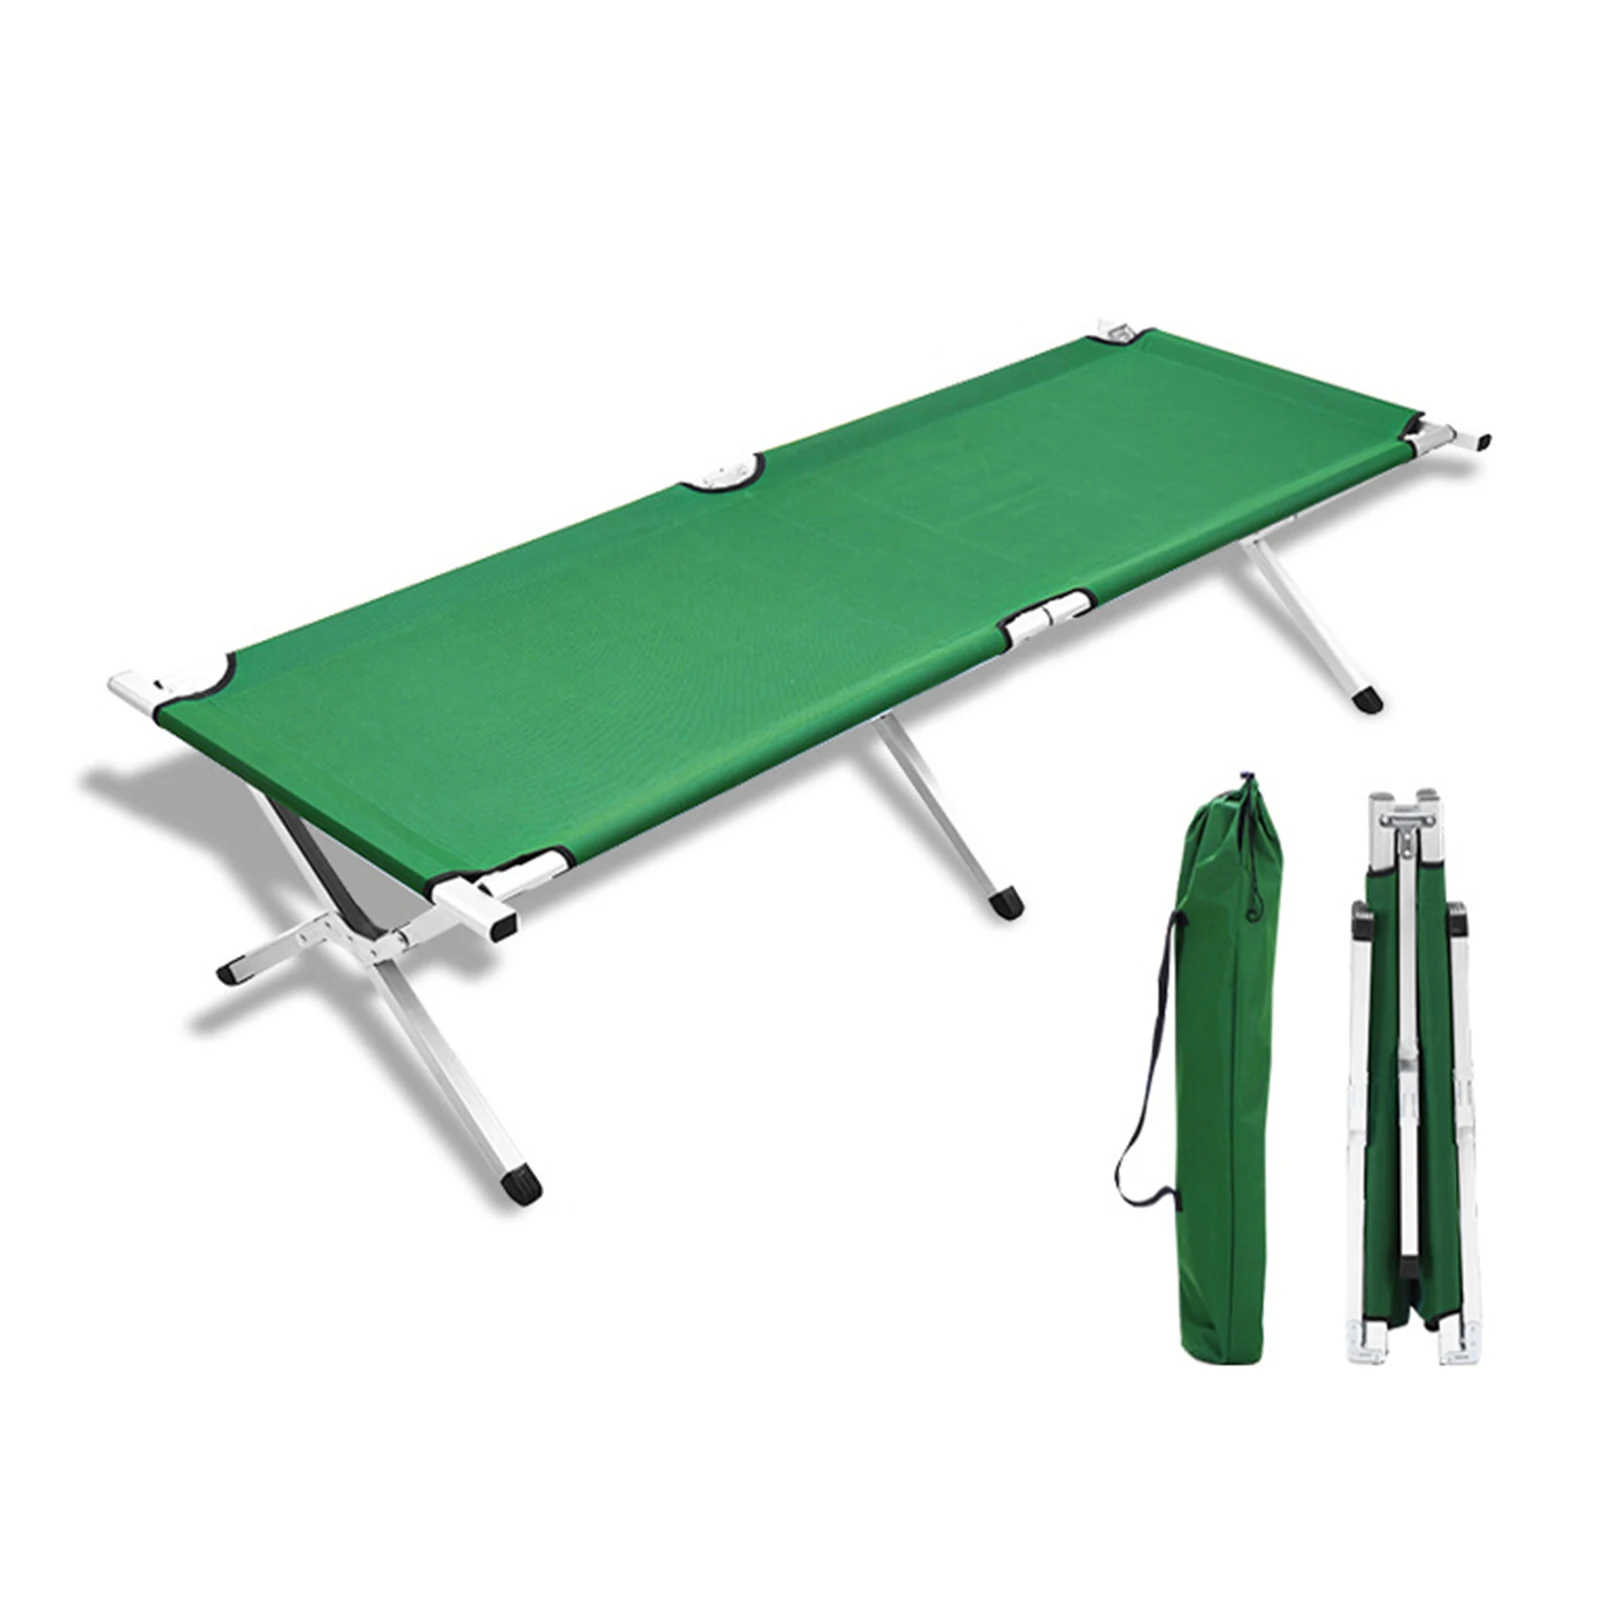 

Folding Camping Cot Portable Iron Folding Bed Outdoor Sleeping Bed for Travel Office Attending Festivals Hosting Guests at Home